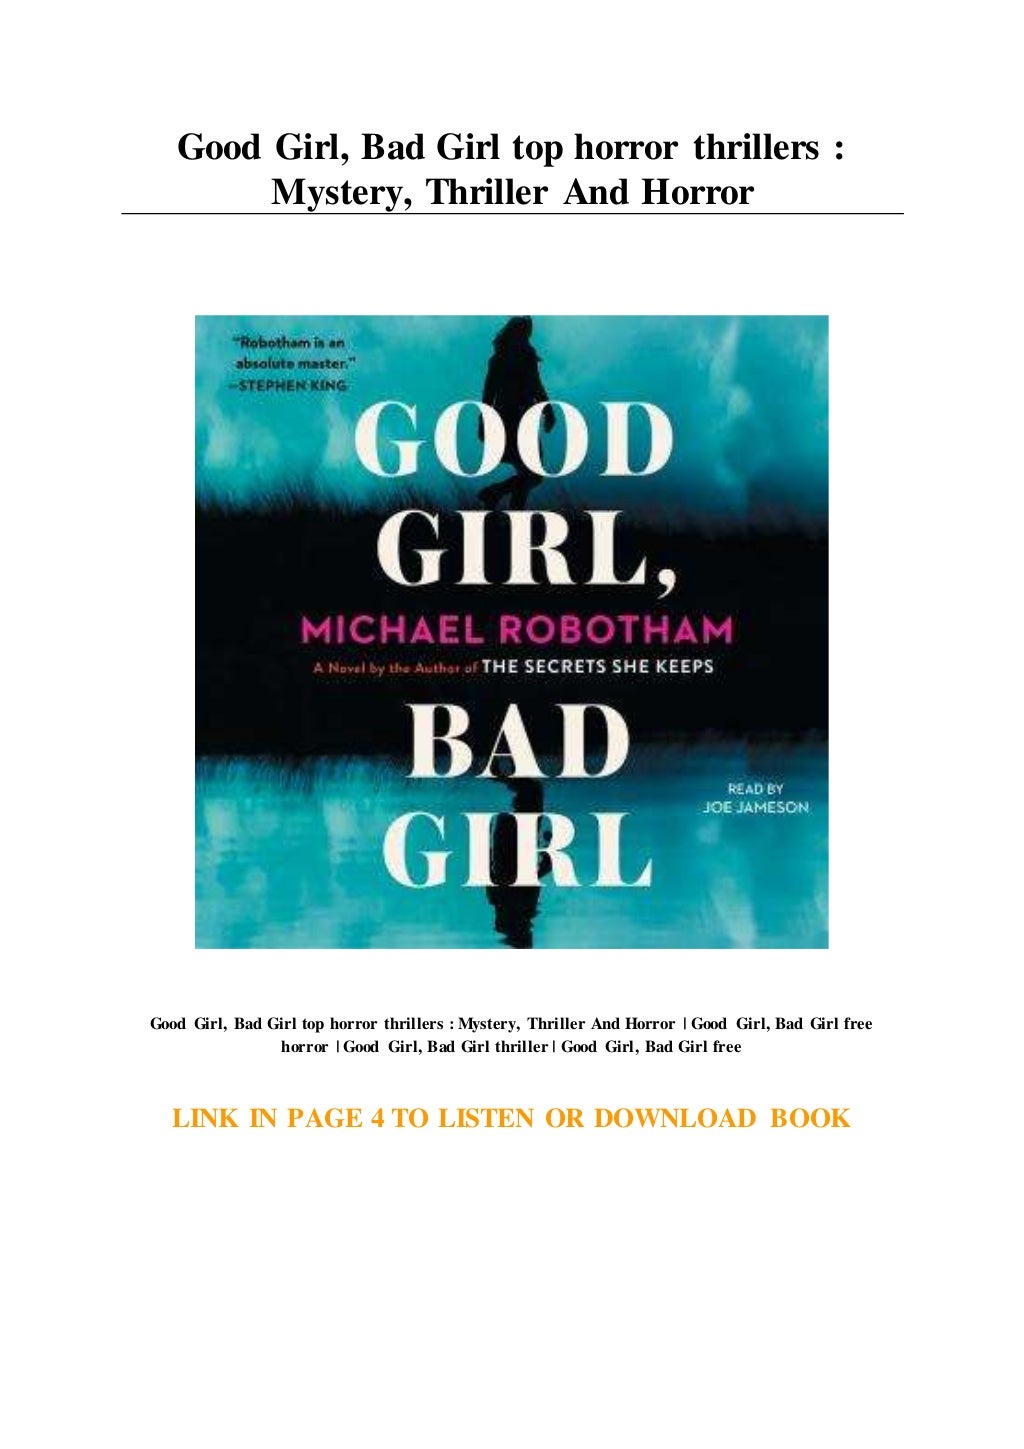 Good Girl... Bad Girl top horror thrillers : Mystery... Thriller And